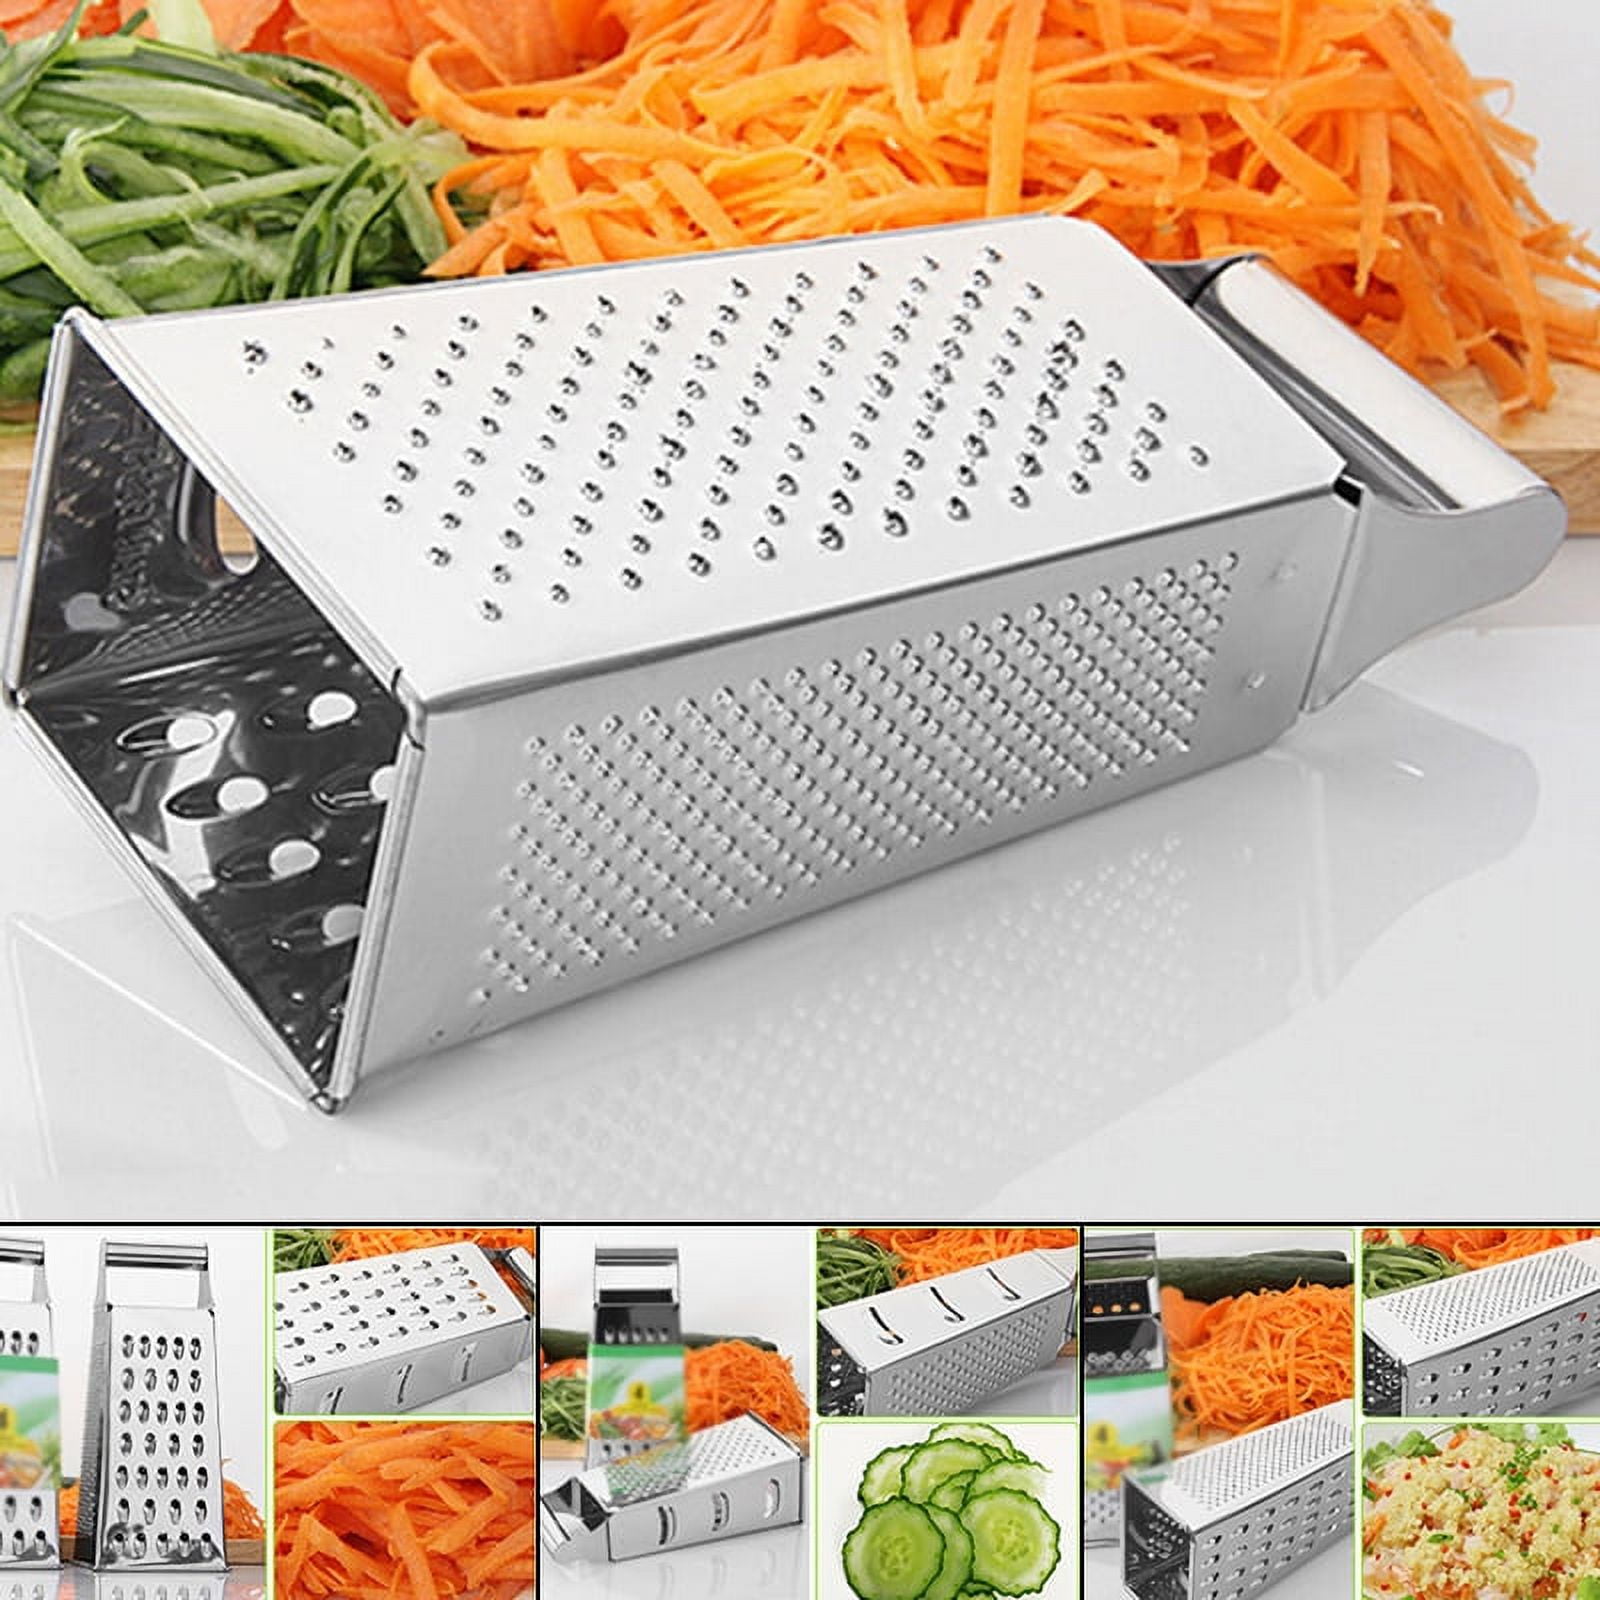 Kotamaki Rotary Cheese Grater 3 In 1, Red, Open Box